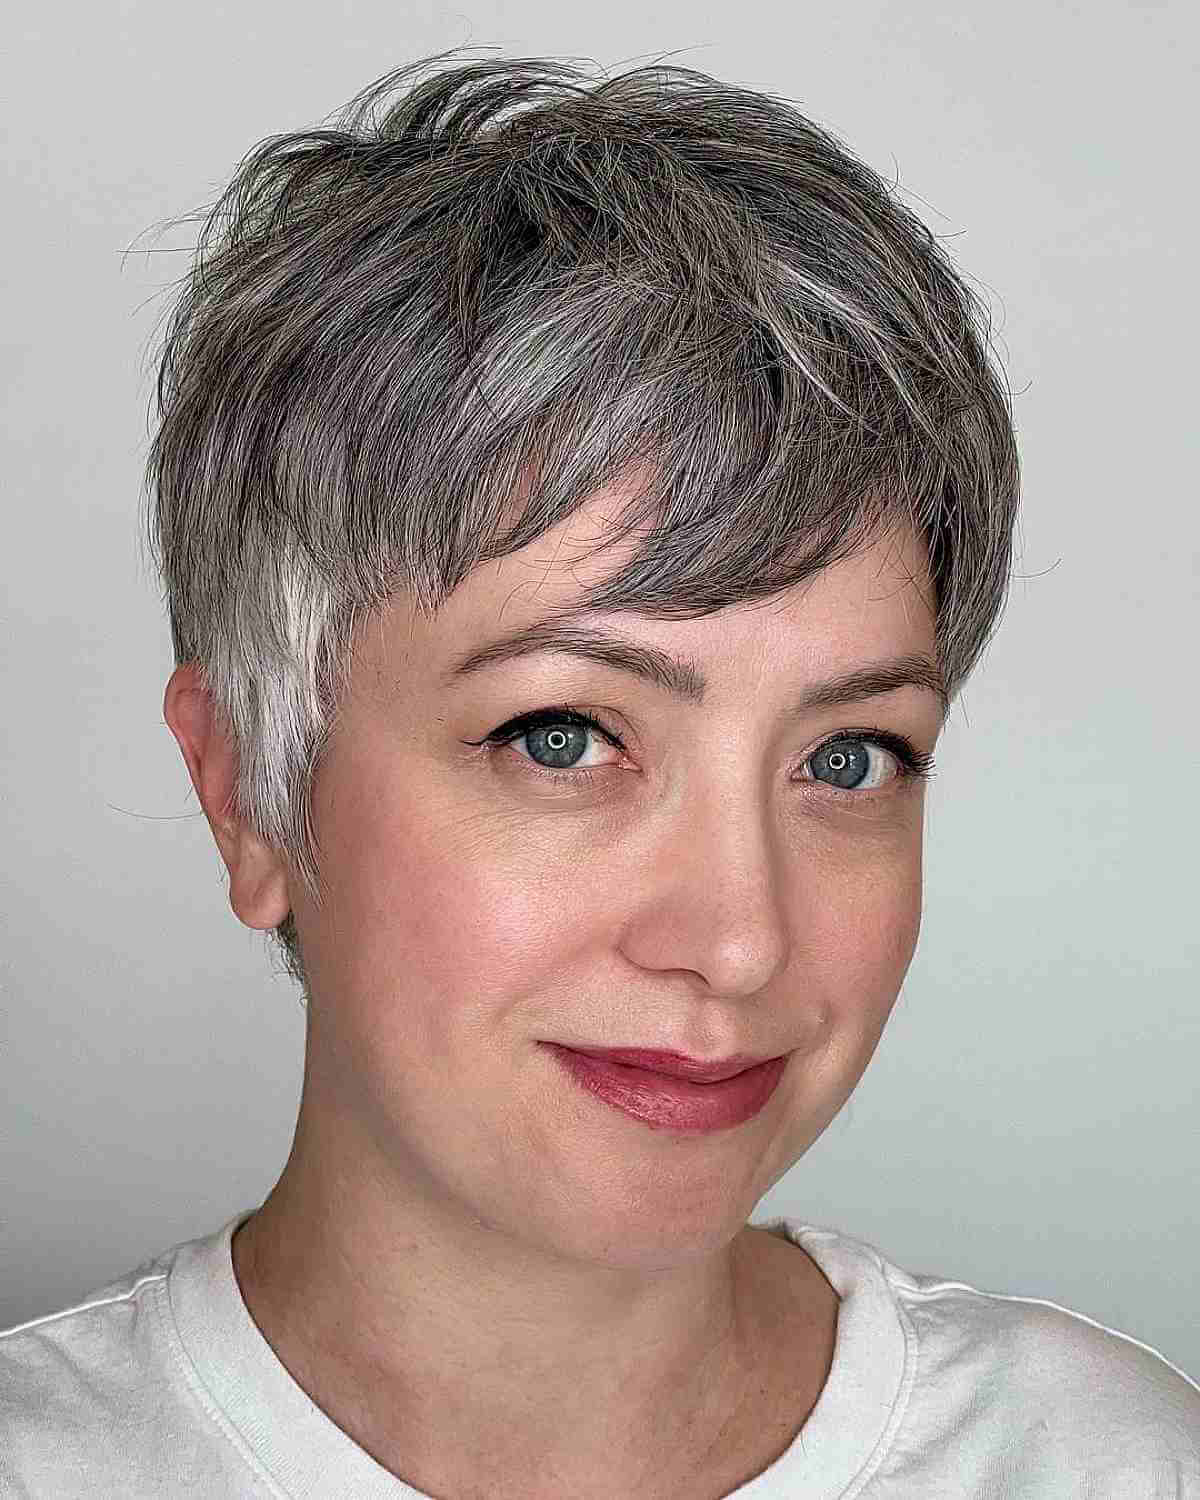 Soft Tousled Pixie Crop for Round Faces